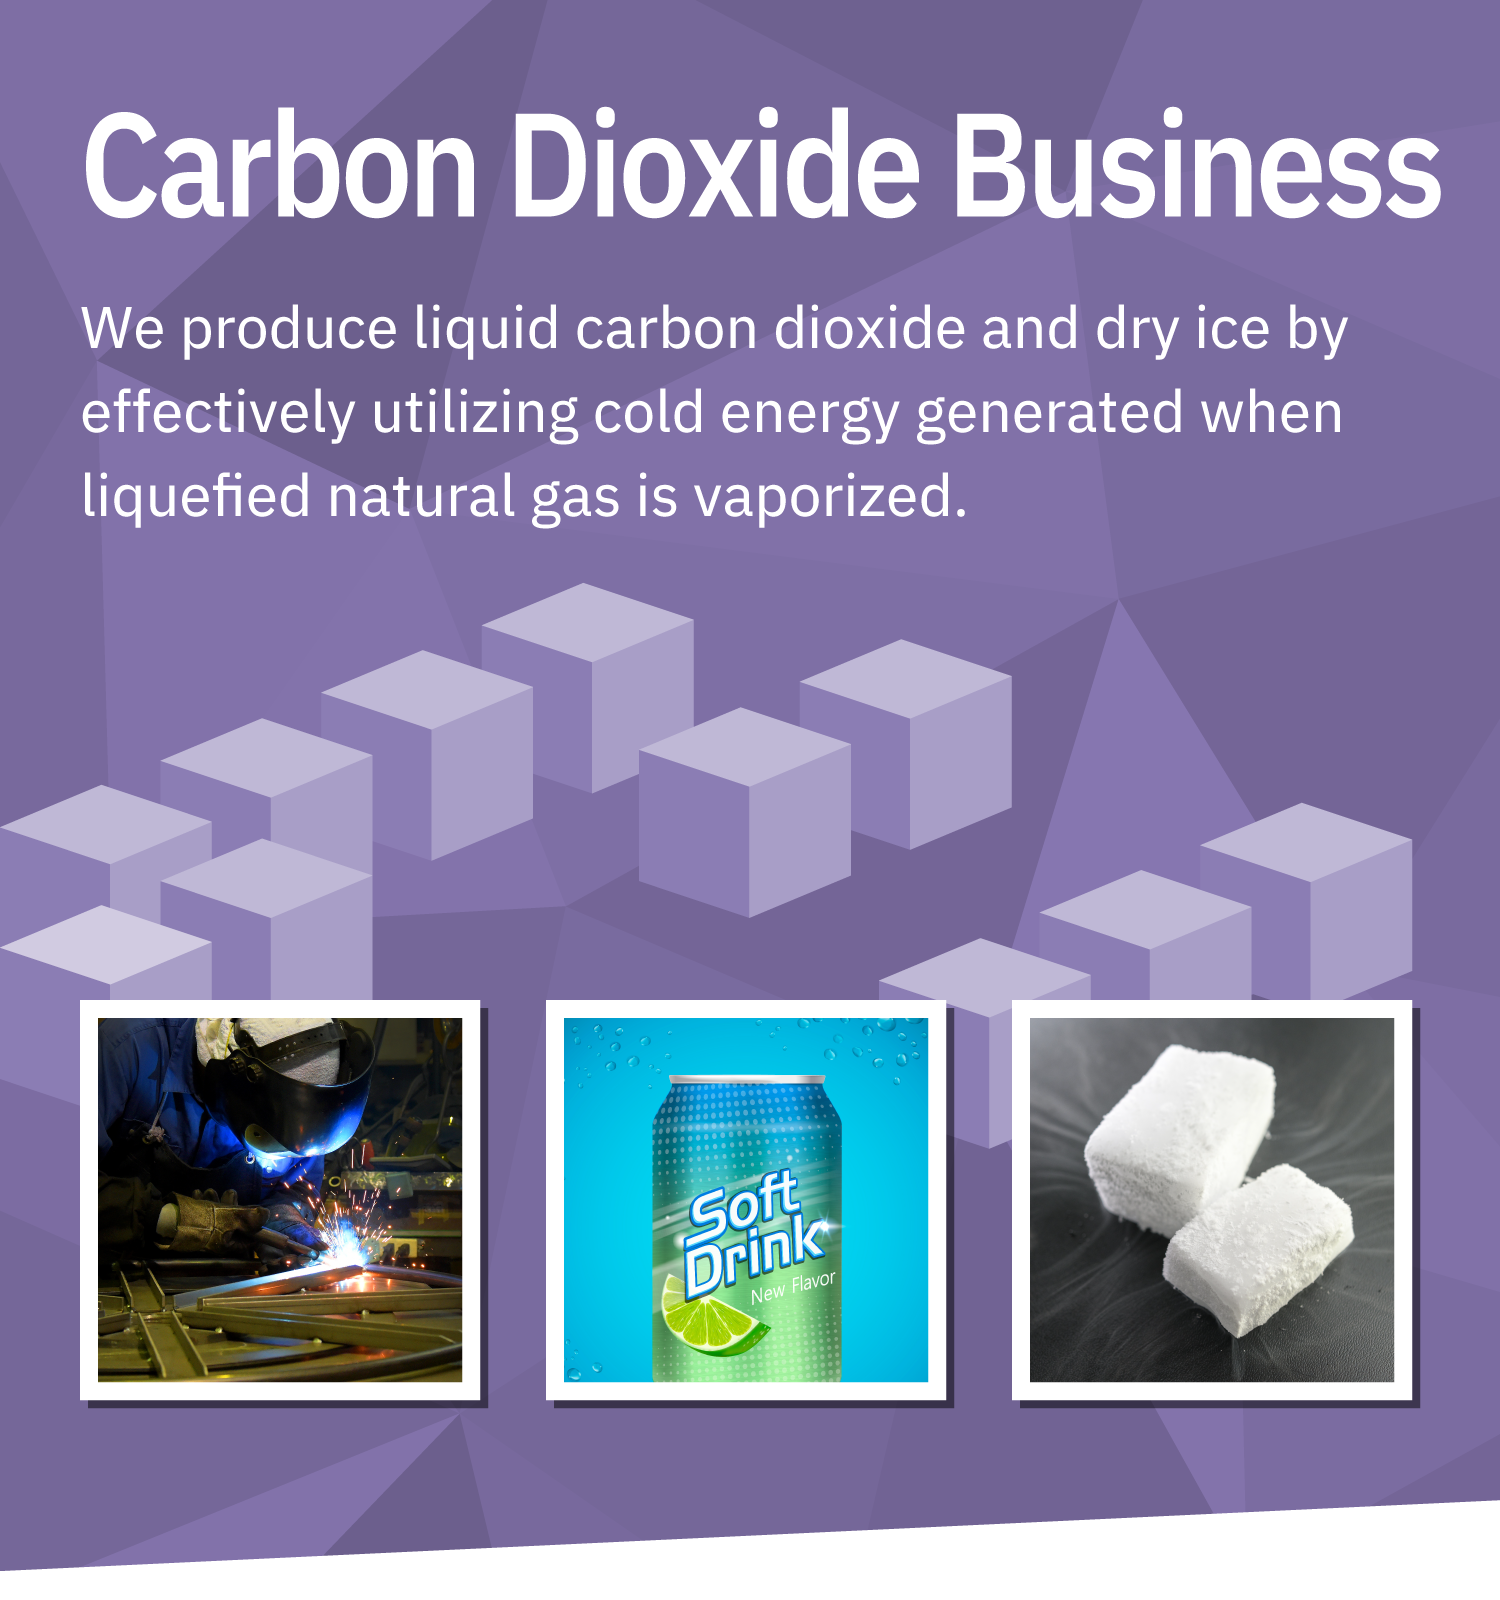 Carbon Dioxide Business: We produce liquid carbon dioxide and dry ice by effectively utilizing cold energy generated when liquefied natural gas is vaporized.